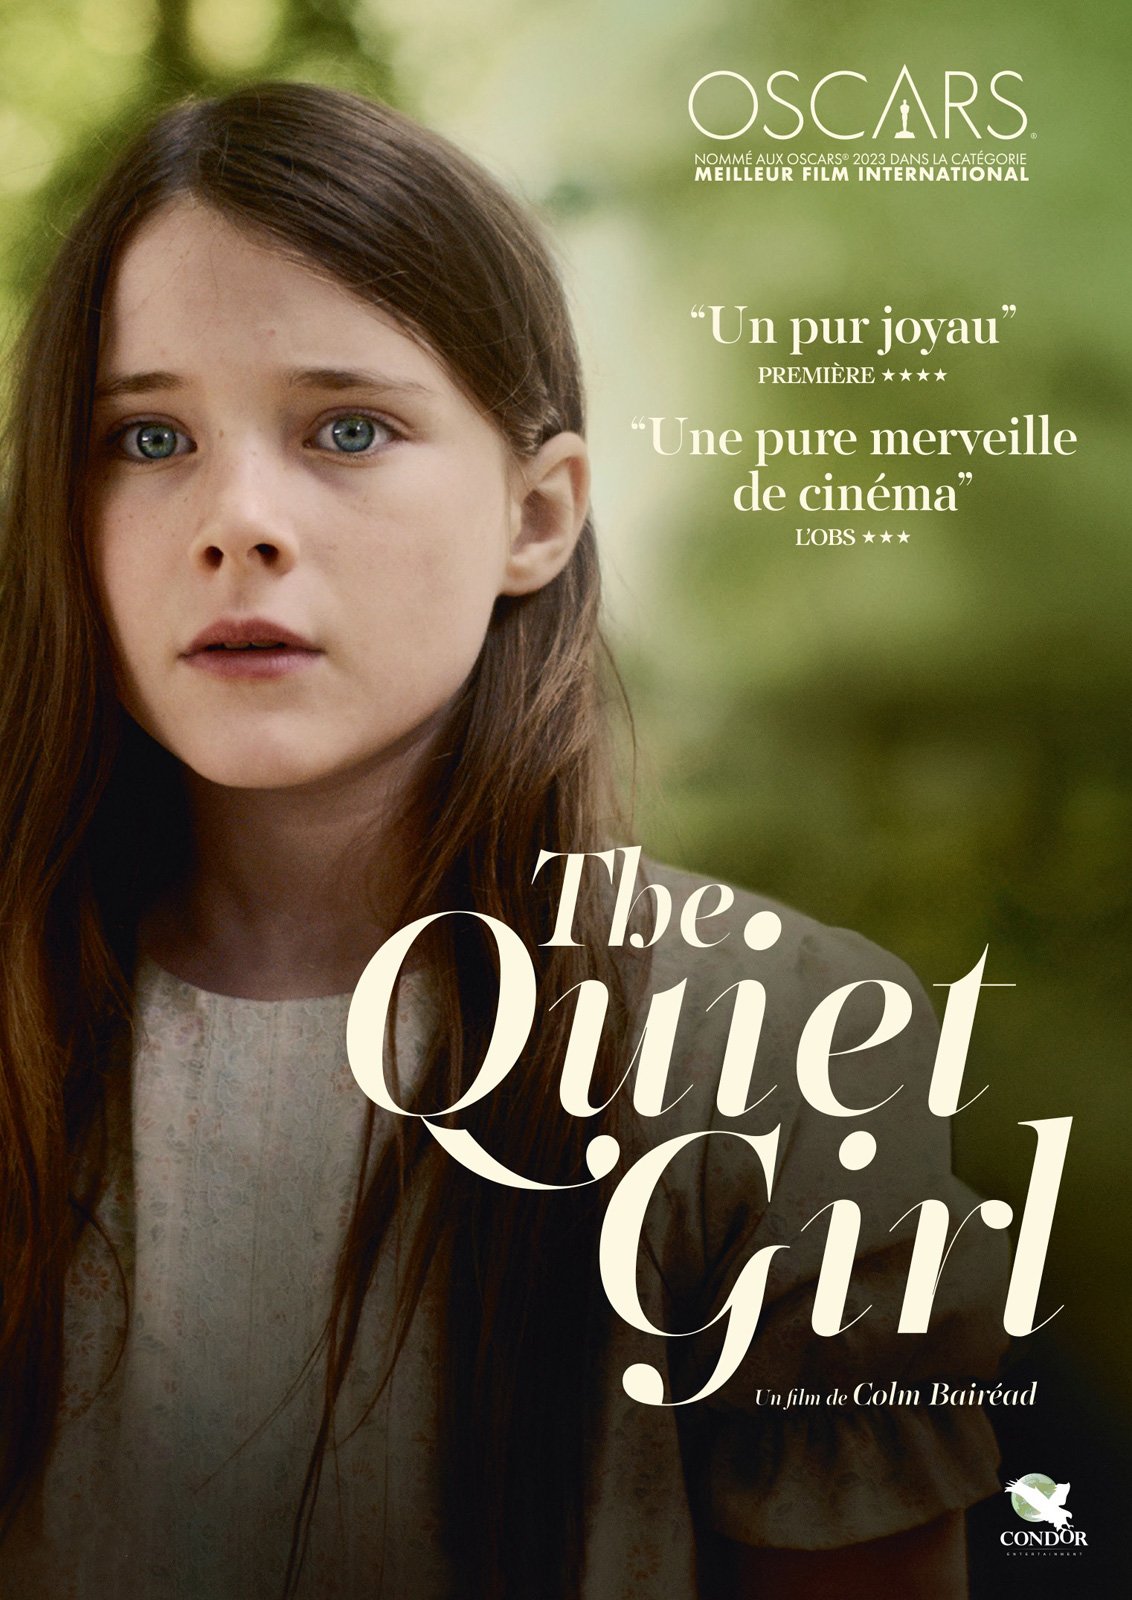 The Quiet Girl streaming vf gratuit